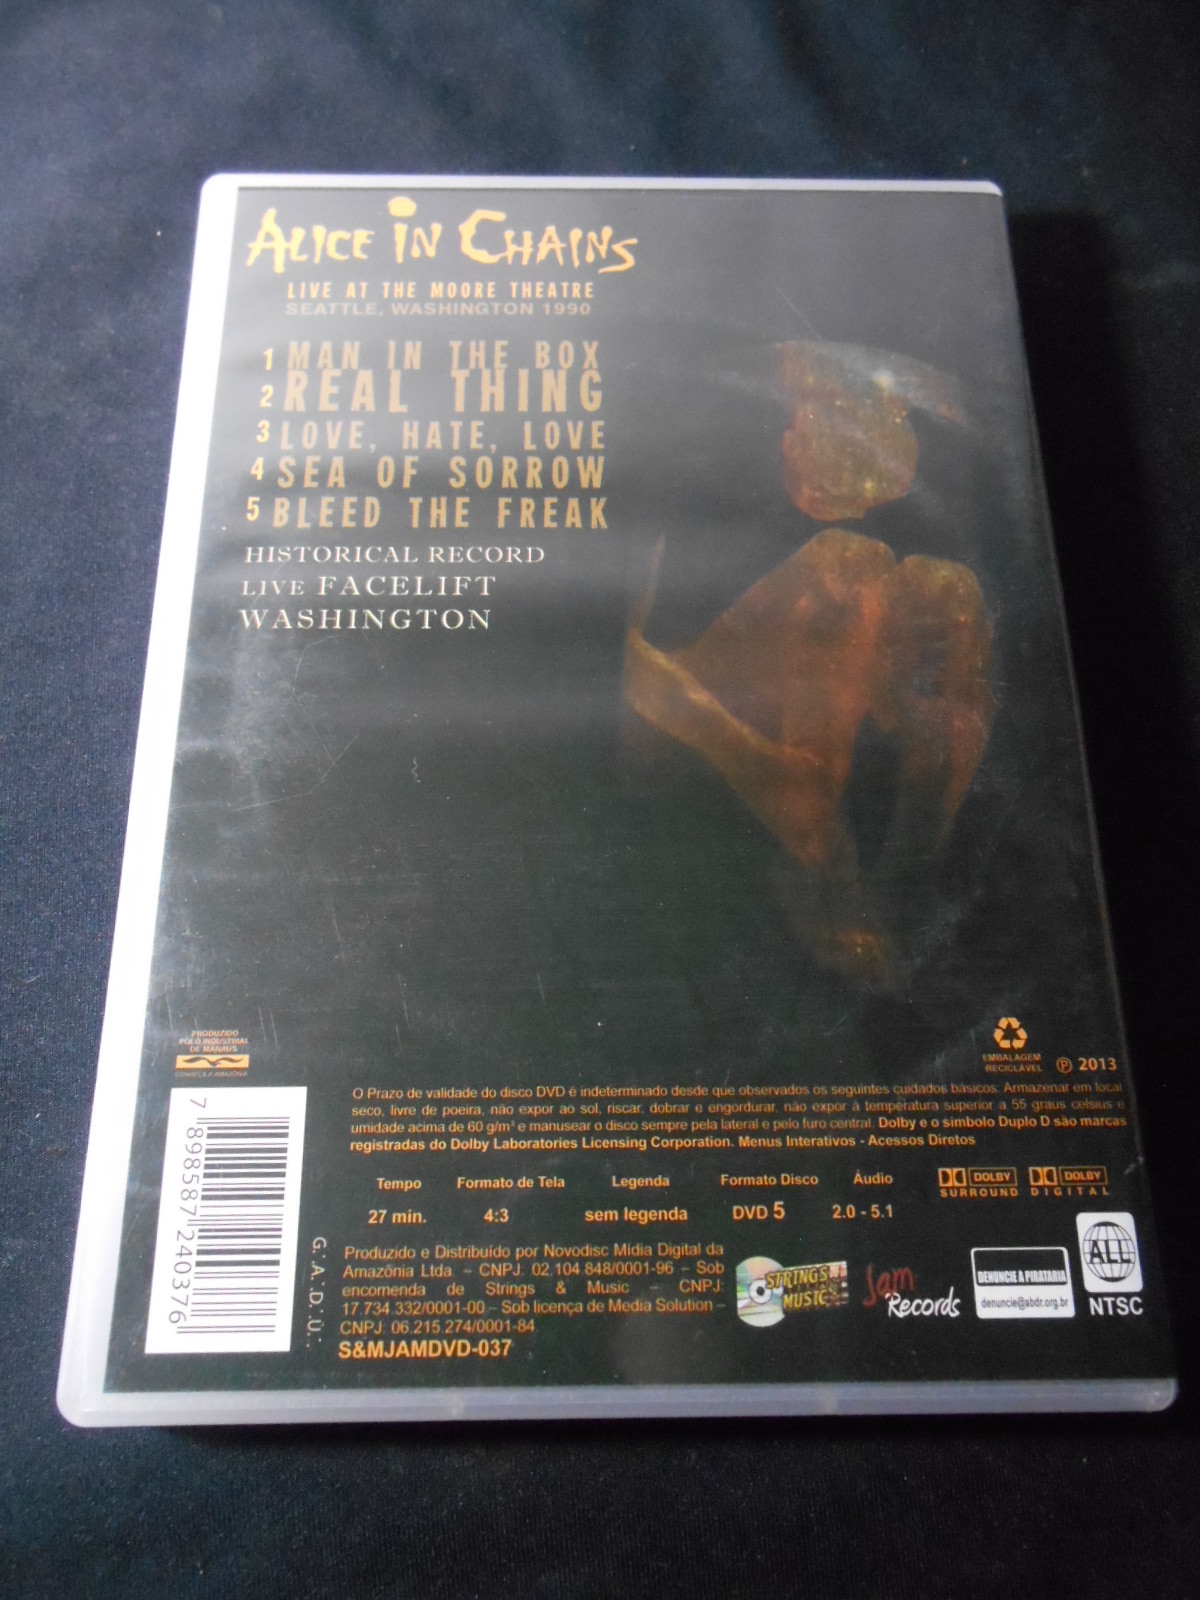 DVD - Alice in Chains - Live at the Moore Theatre